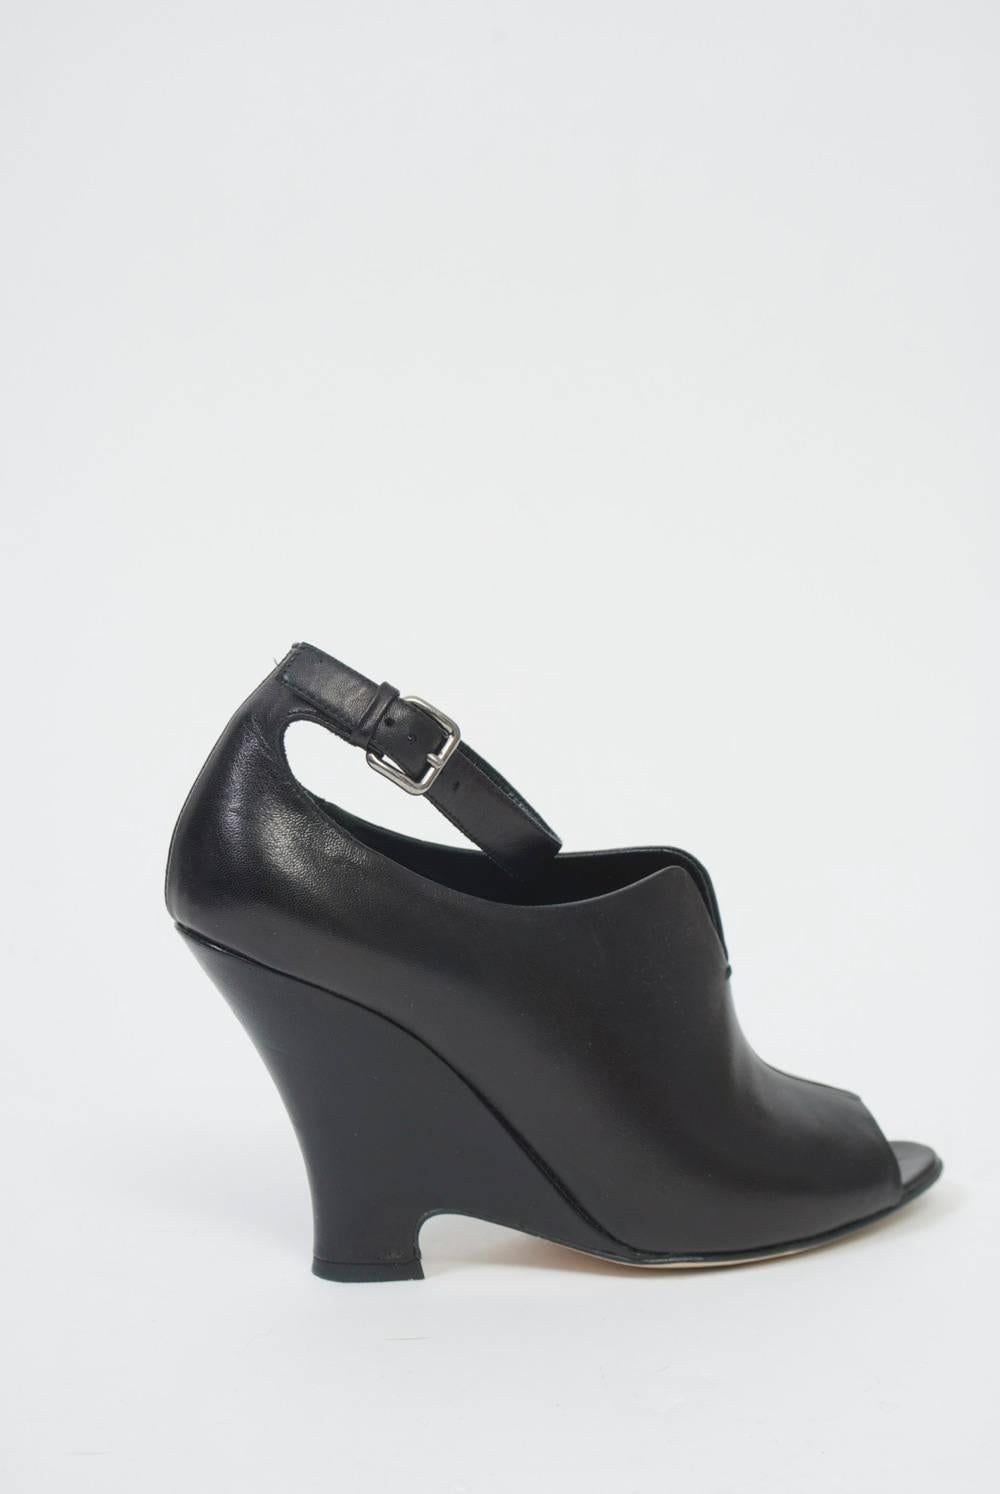 Miu Miu Black Leather Shoes In Excellent Condition In Alford, MA